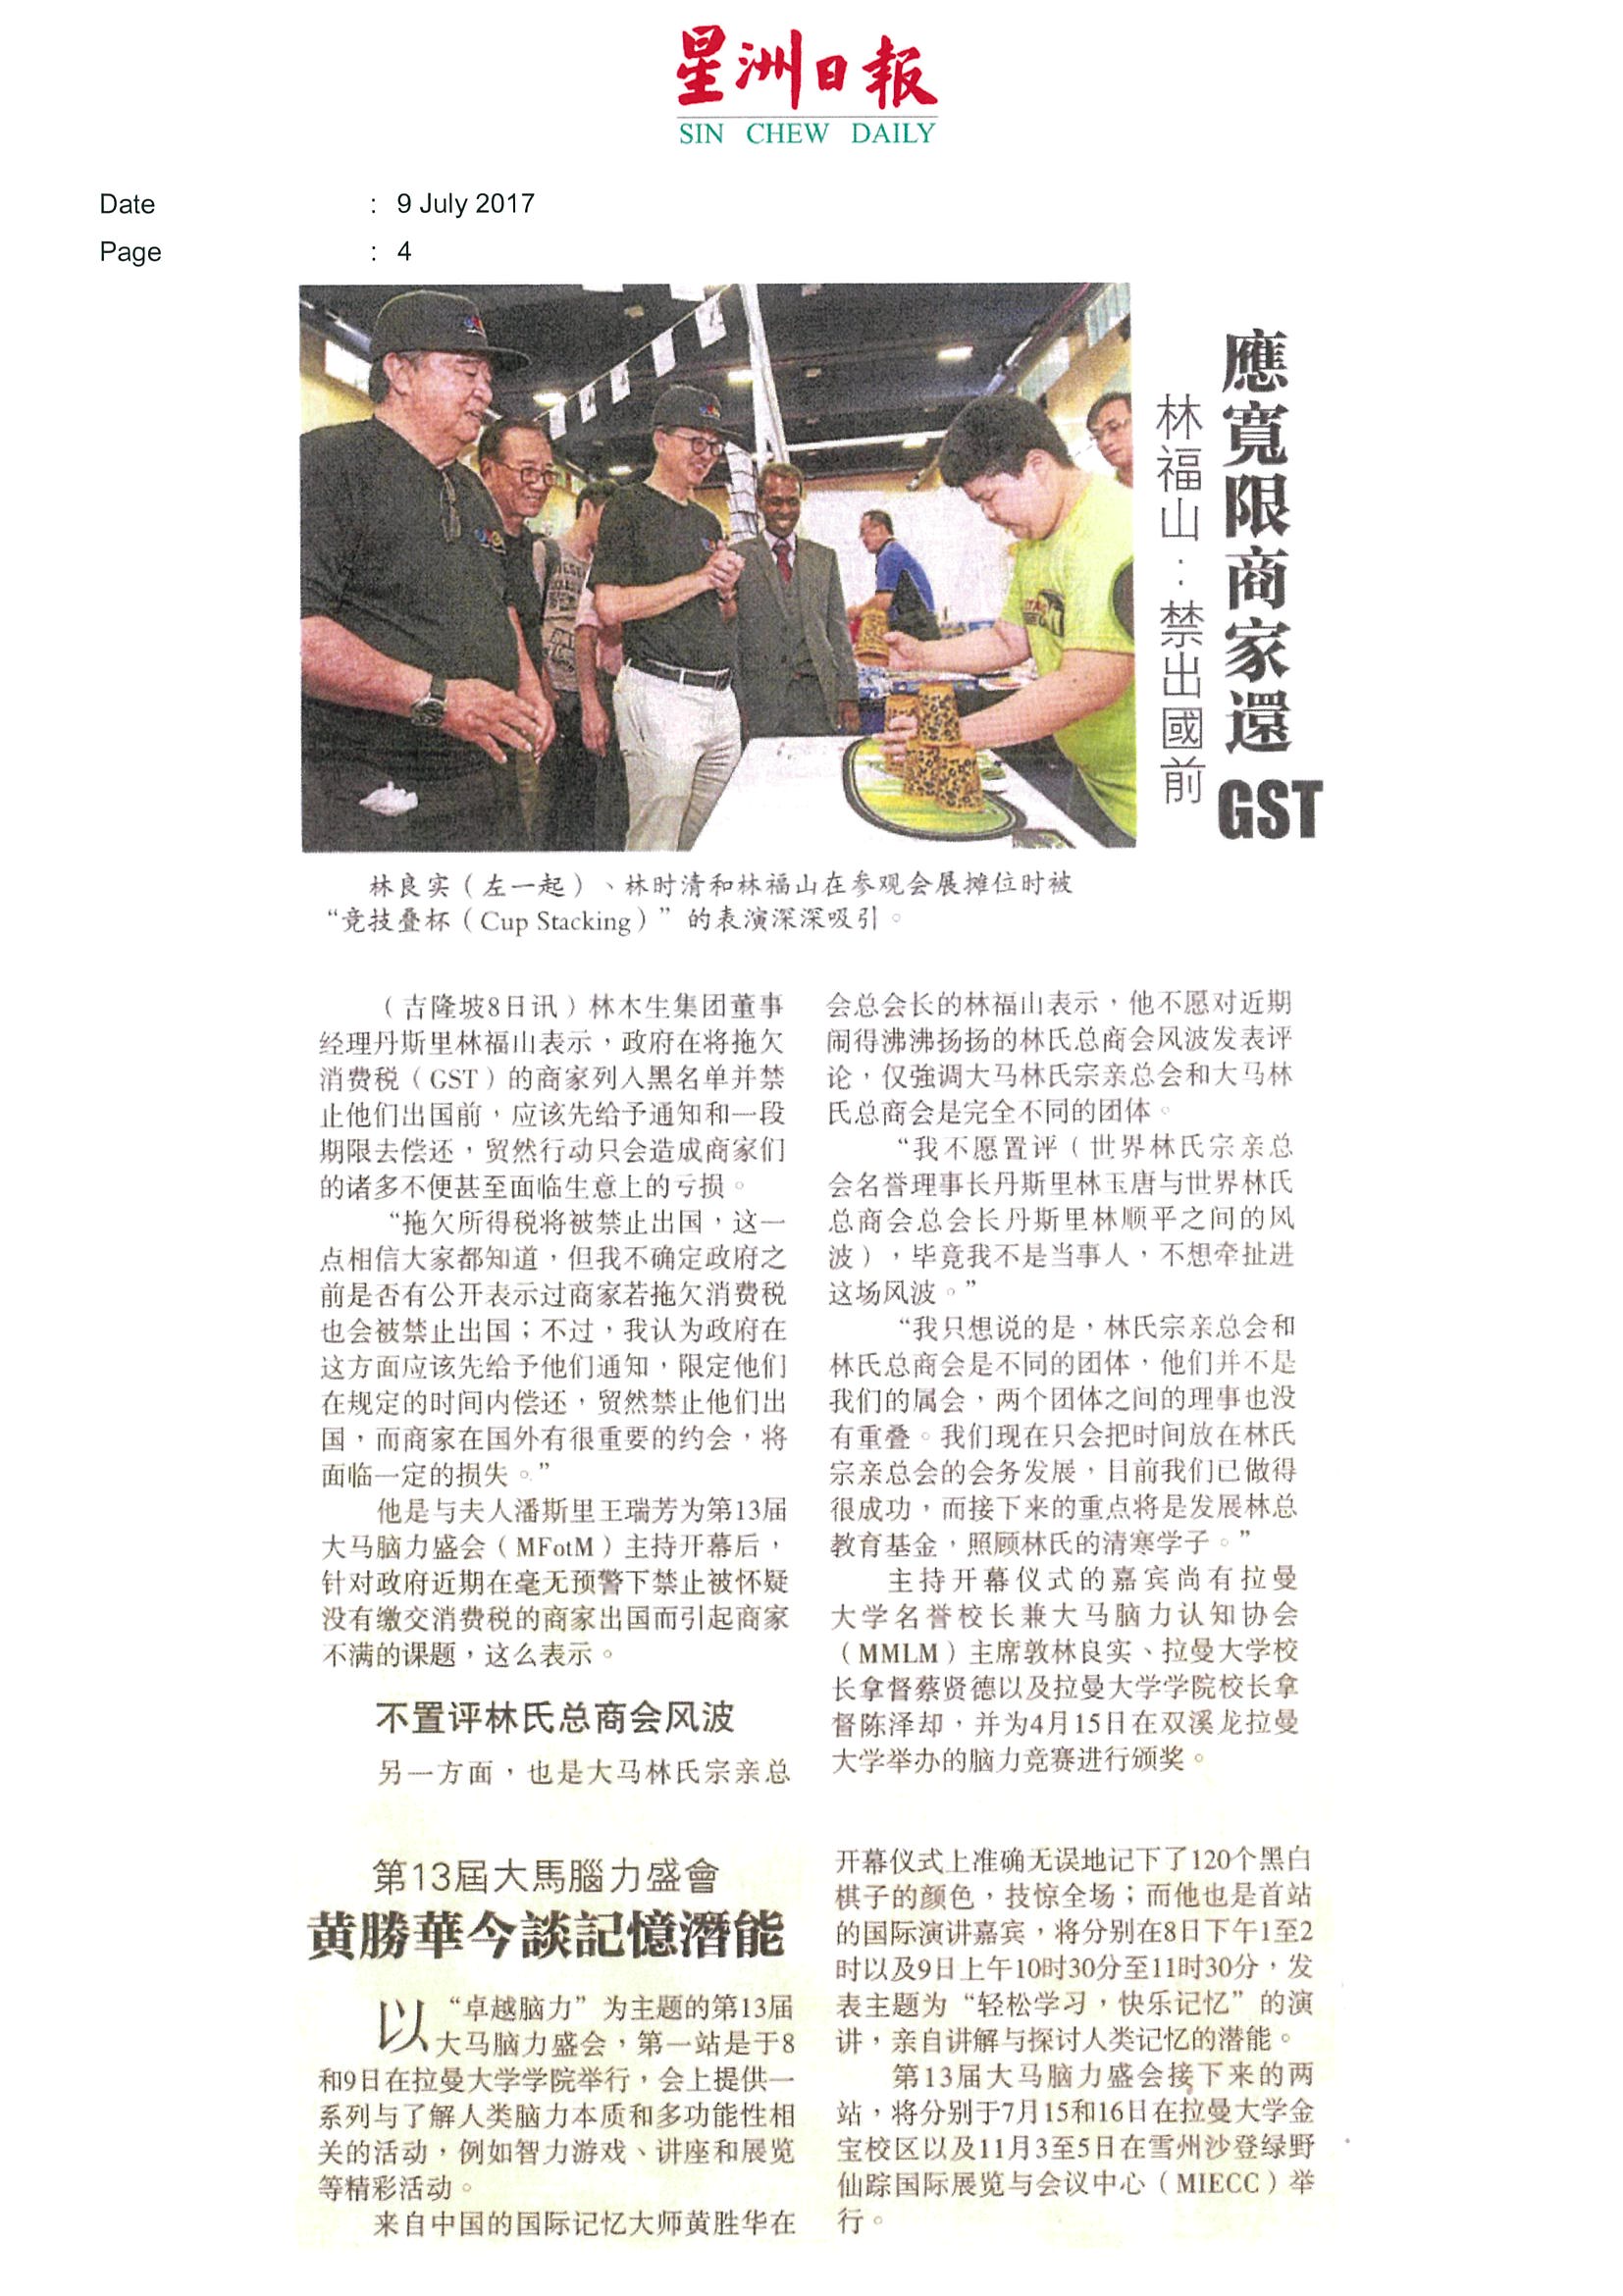 2017.07.09 Sin Chew – Should extend the time limit for businesses to repay GST stated Lim Hock San